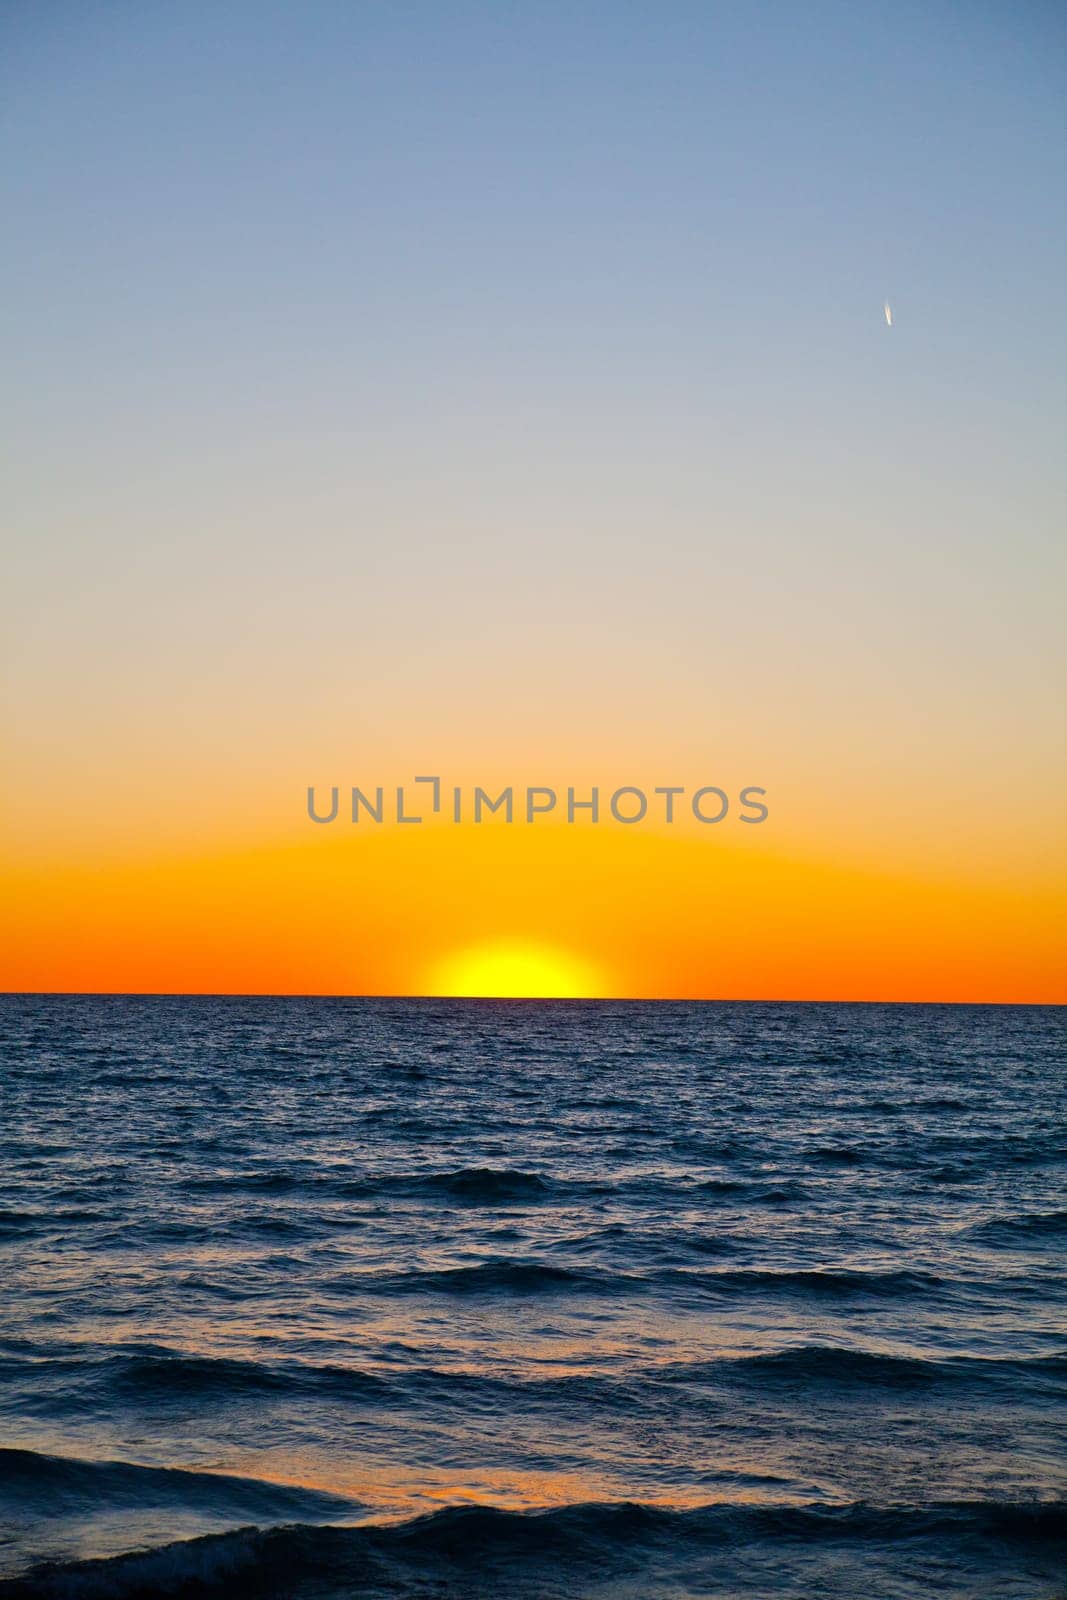 Tranquil sunset over the ocean, with vibrant hues of orange and yellow painting the sky. The calm waves reflect the golden hour glow, creating a serene atmosphere. Ideal for conveying peace, closure, and natural beauty.